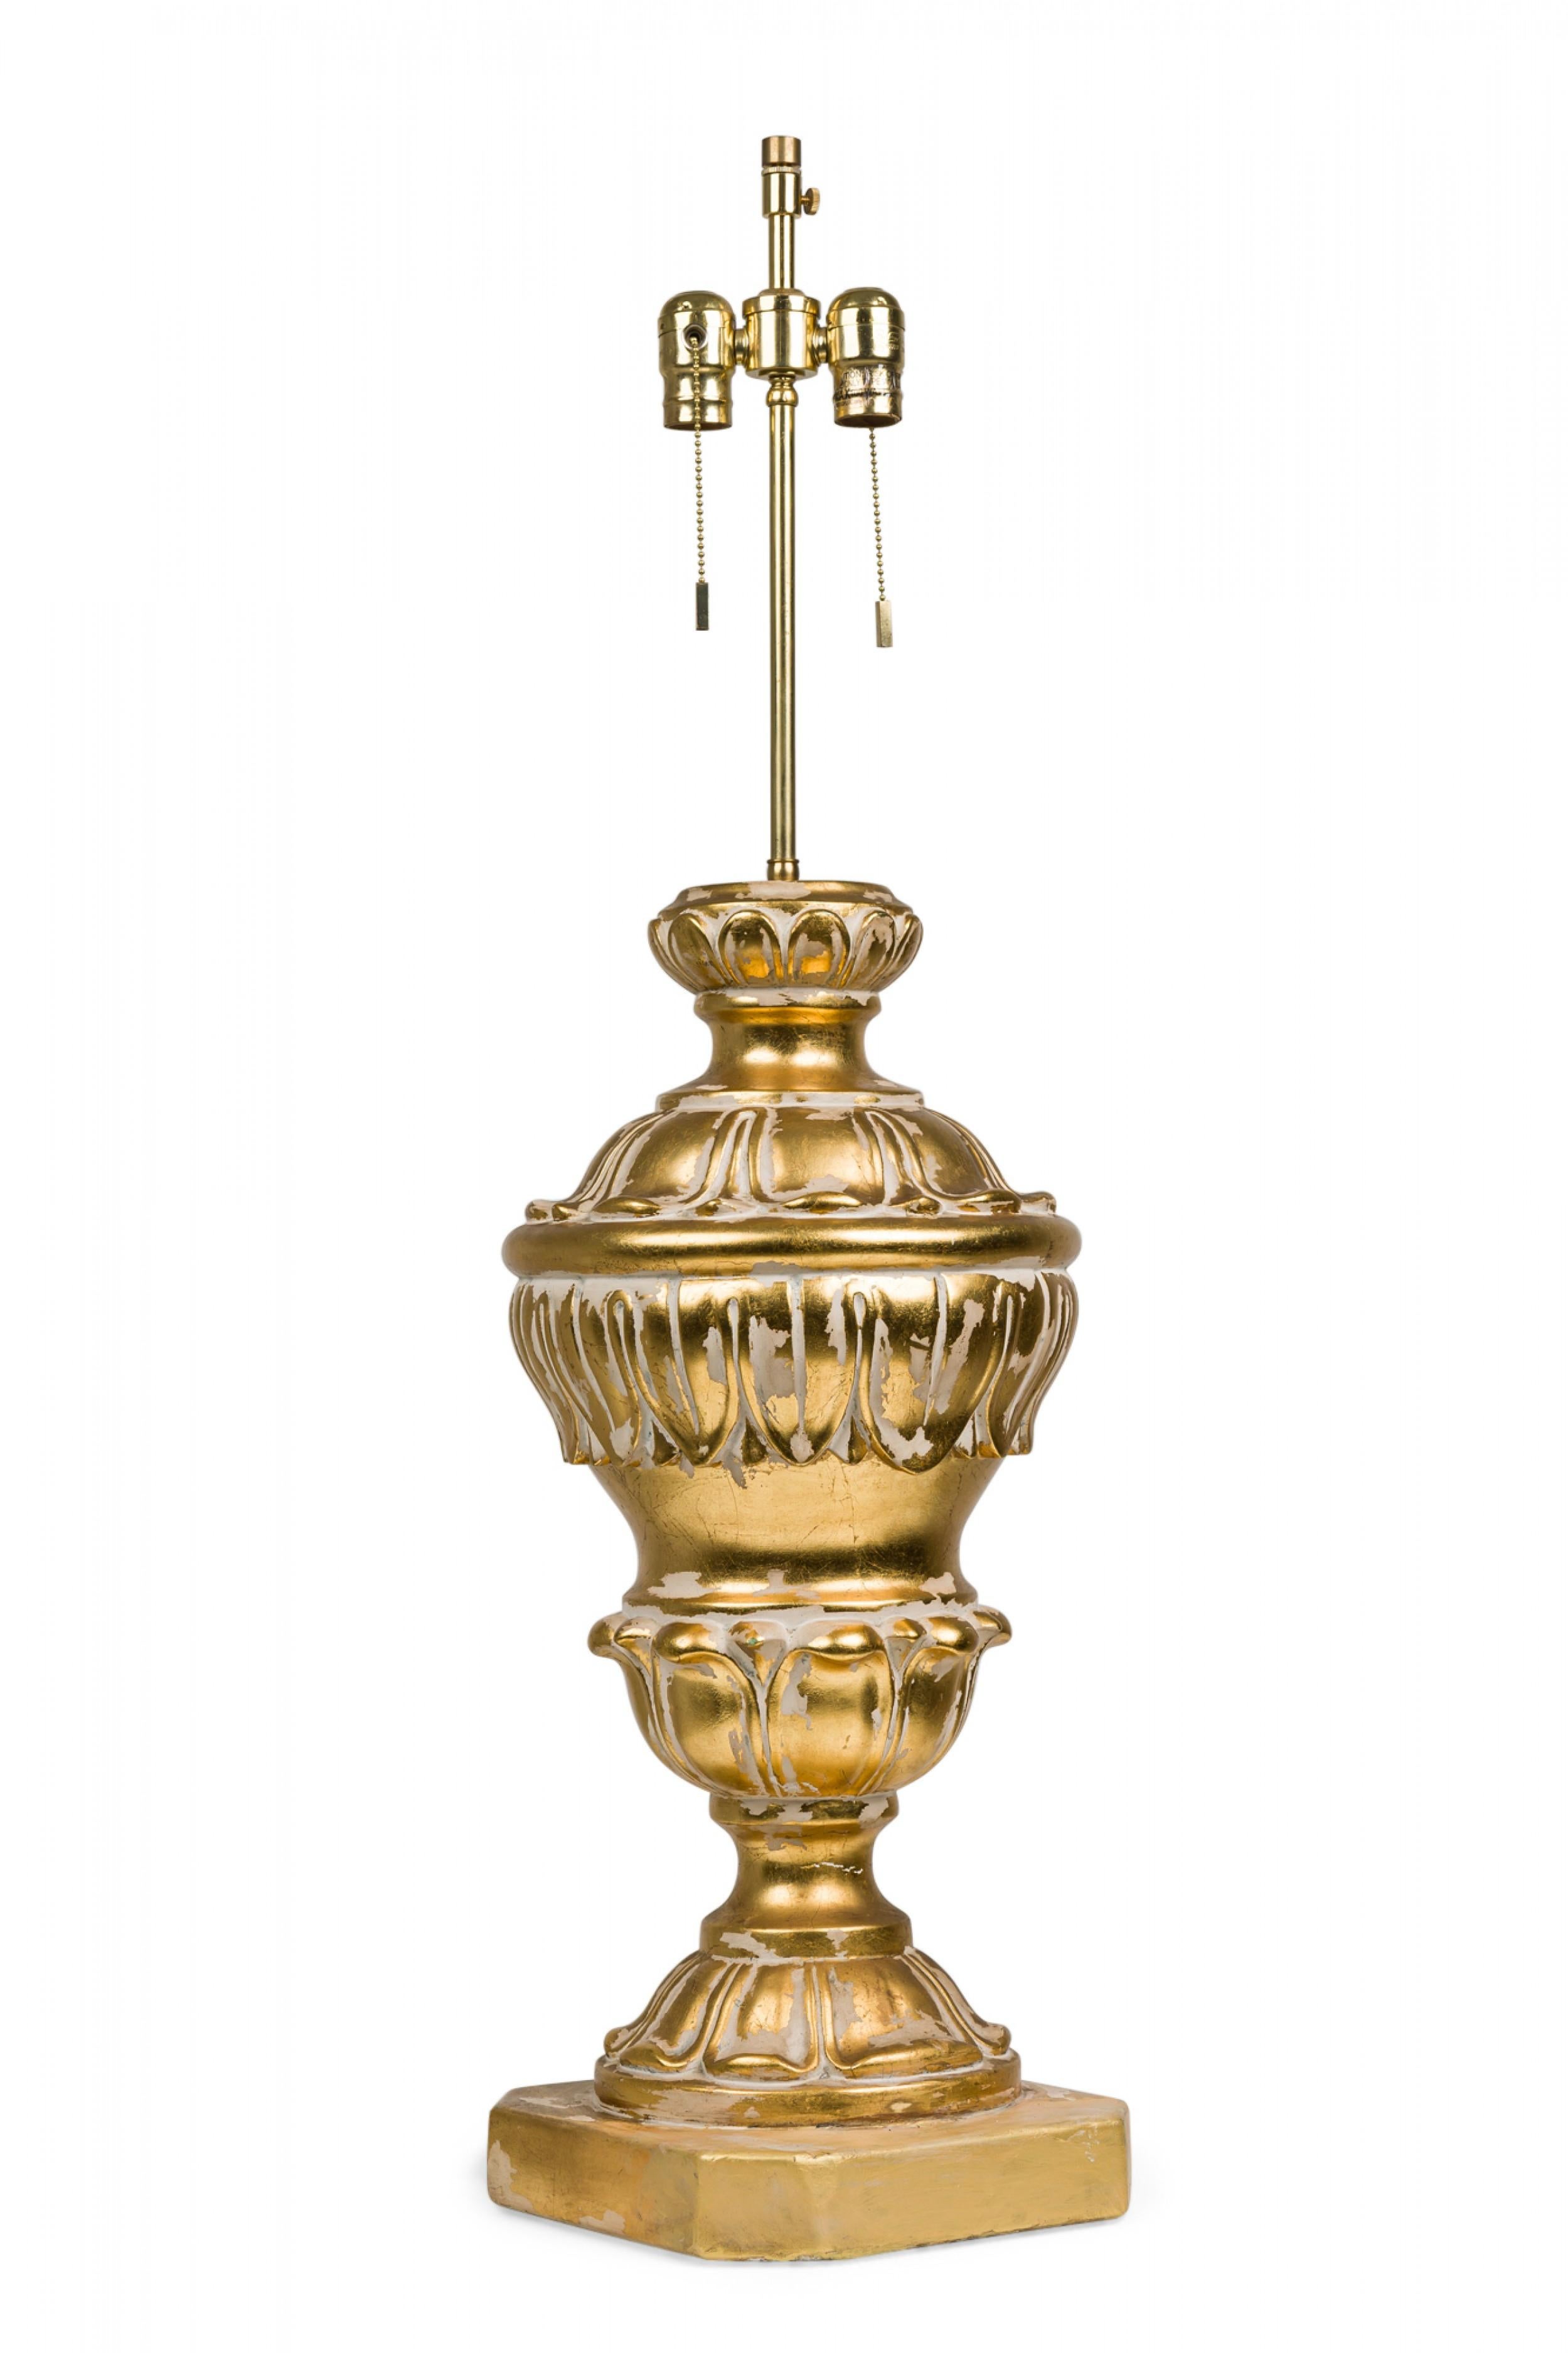 PAIR of midcentury American cast plaster table lamps in elaborate baluster form, both with extended brass stems and functioning beaded light switch sockets, molded in neoclassic scroll form with painted parcel gilt highlights in an antiqued distress